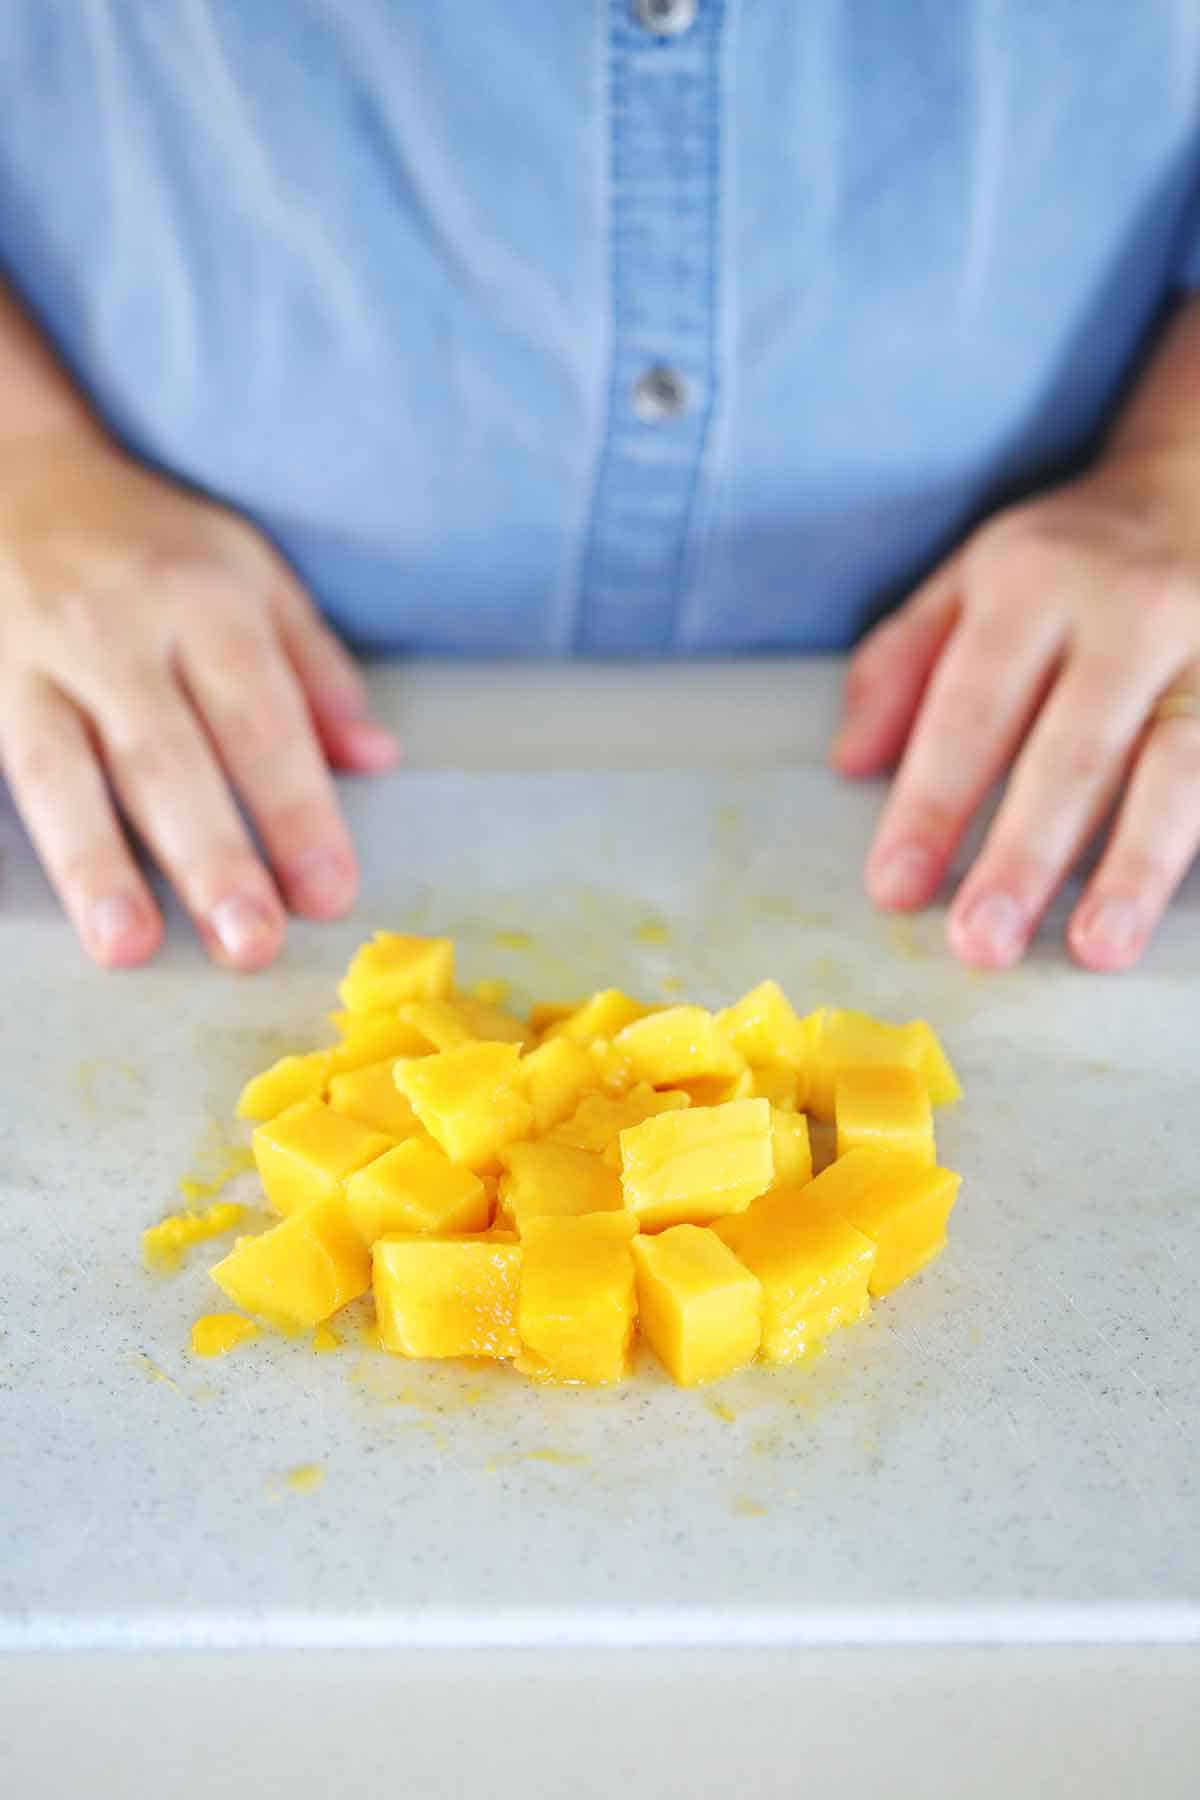 How To Cut A Mango Two Easy Ways Bowl Of Delicious,Jobs Online Apply